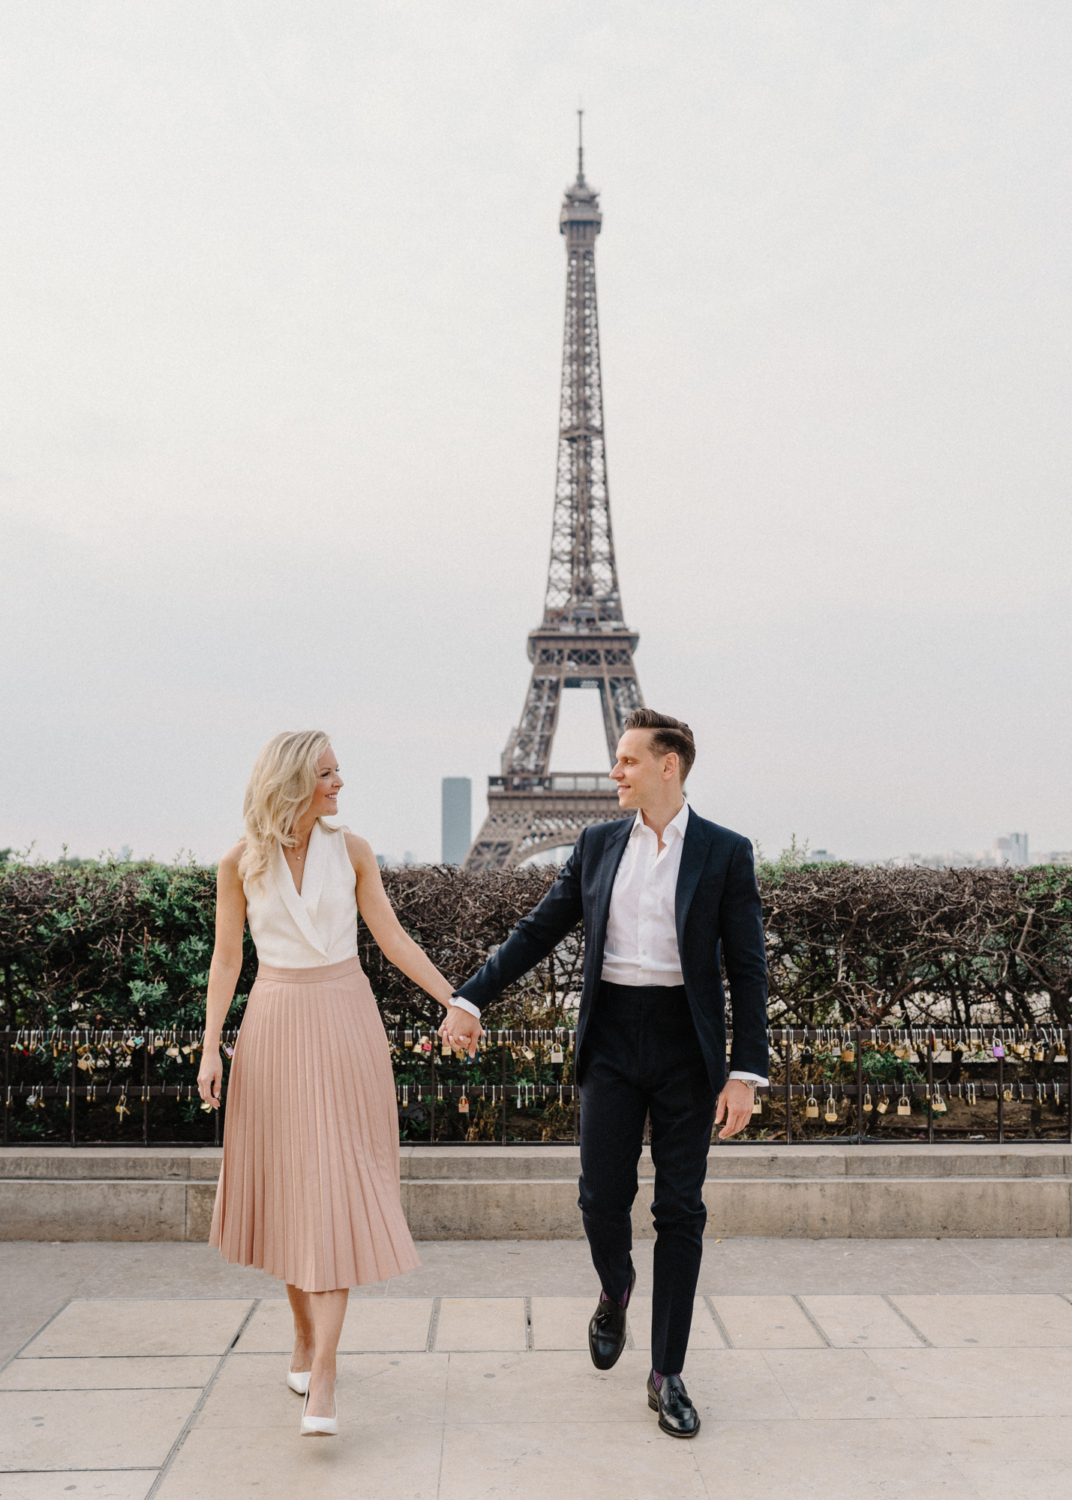 engaged couple laugh and walk at eiffel tower paris